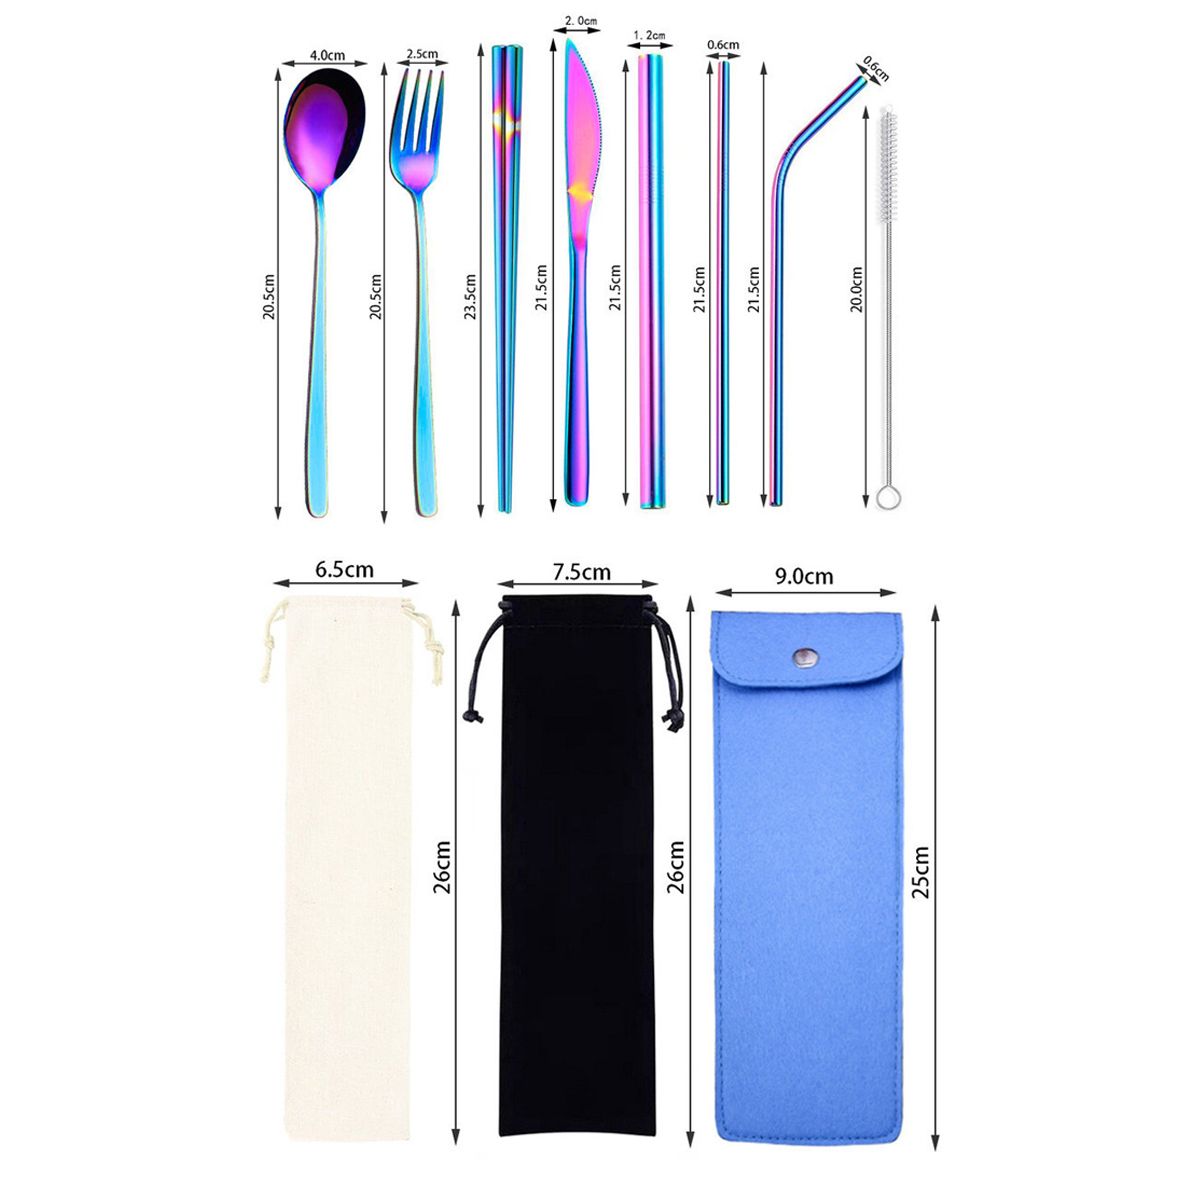 8Pcs-Titanium-Plated-304-Stainless-Steel-Cutlery-Set-Knife-Fork-Spoon-Chopsticks-And-Straw-Combinati-1716199